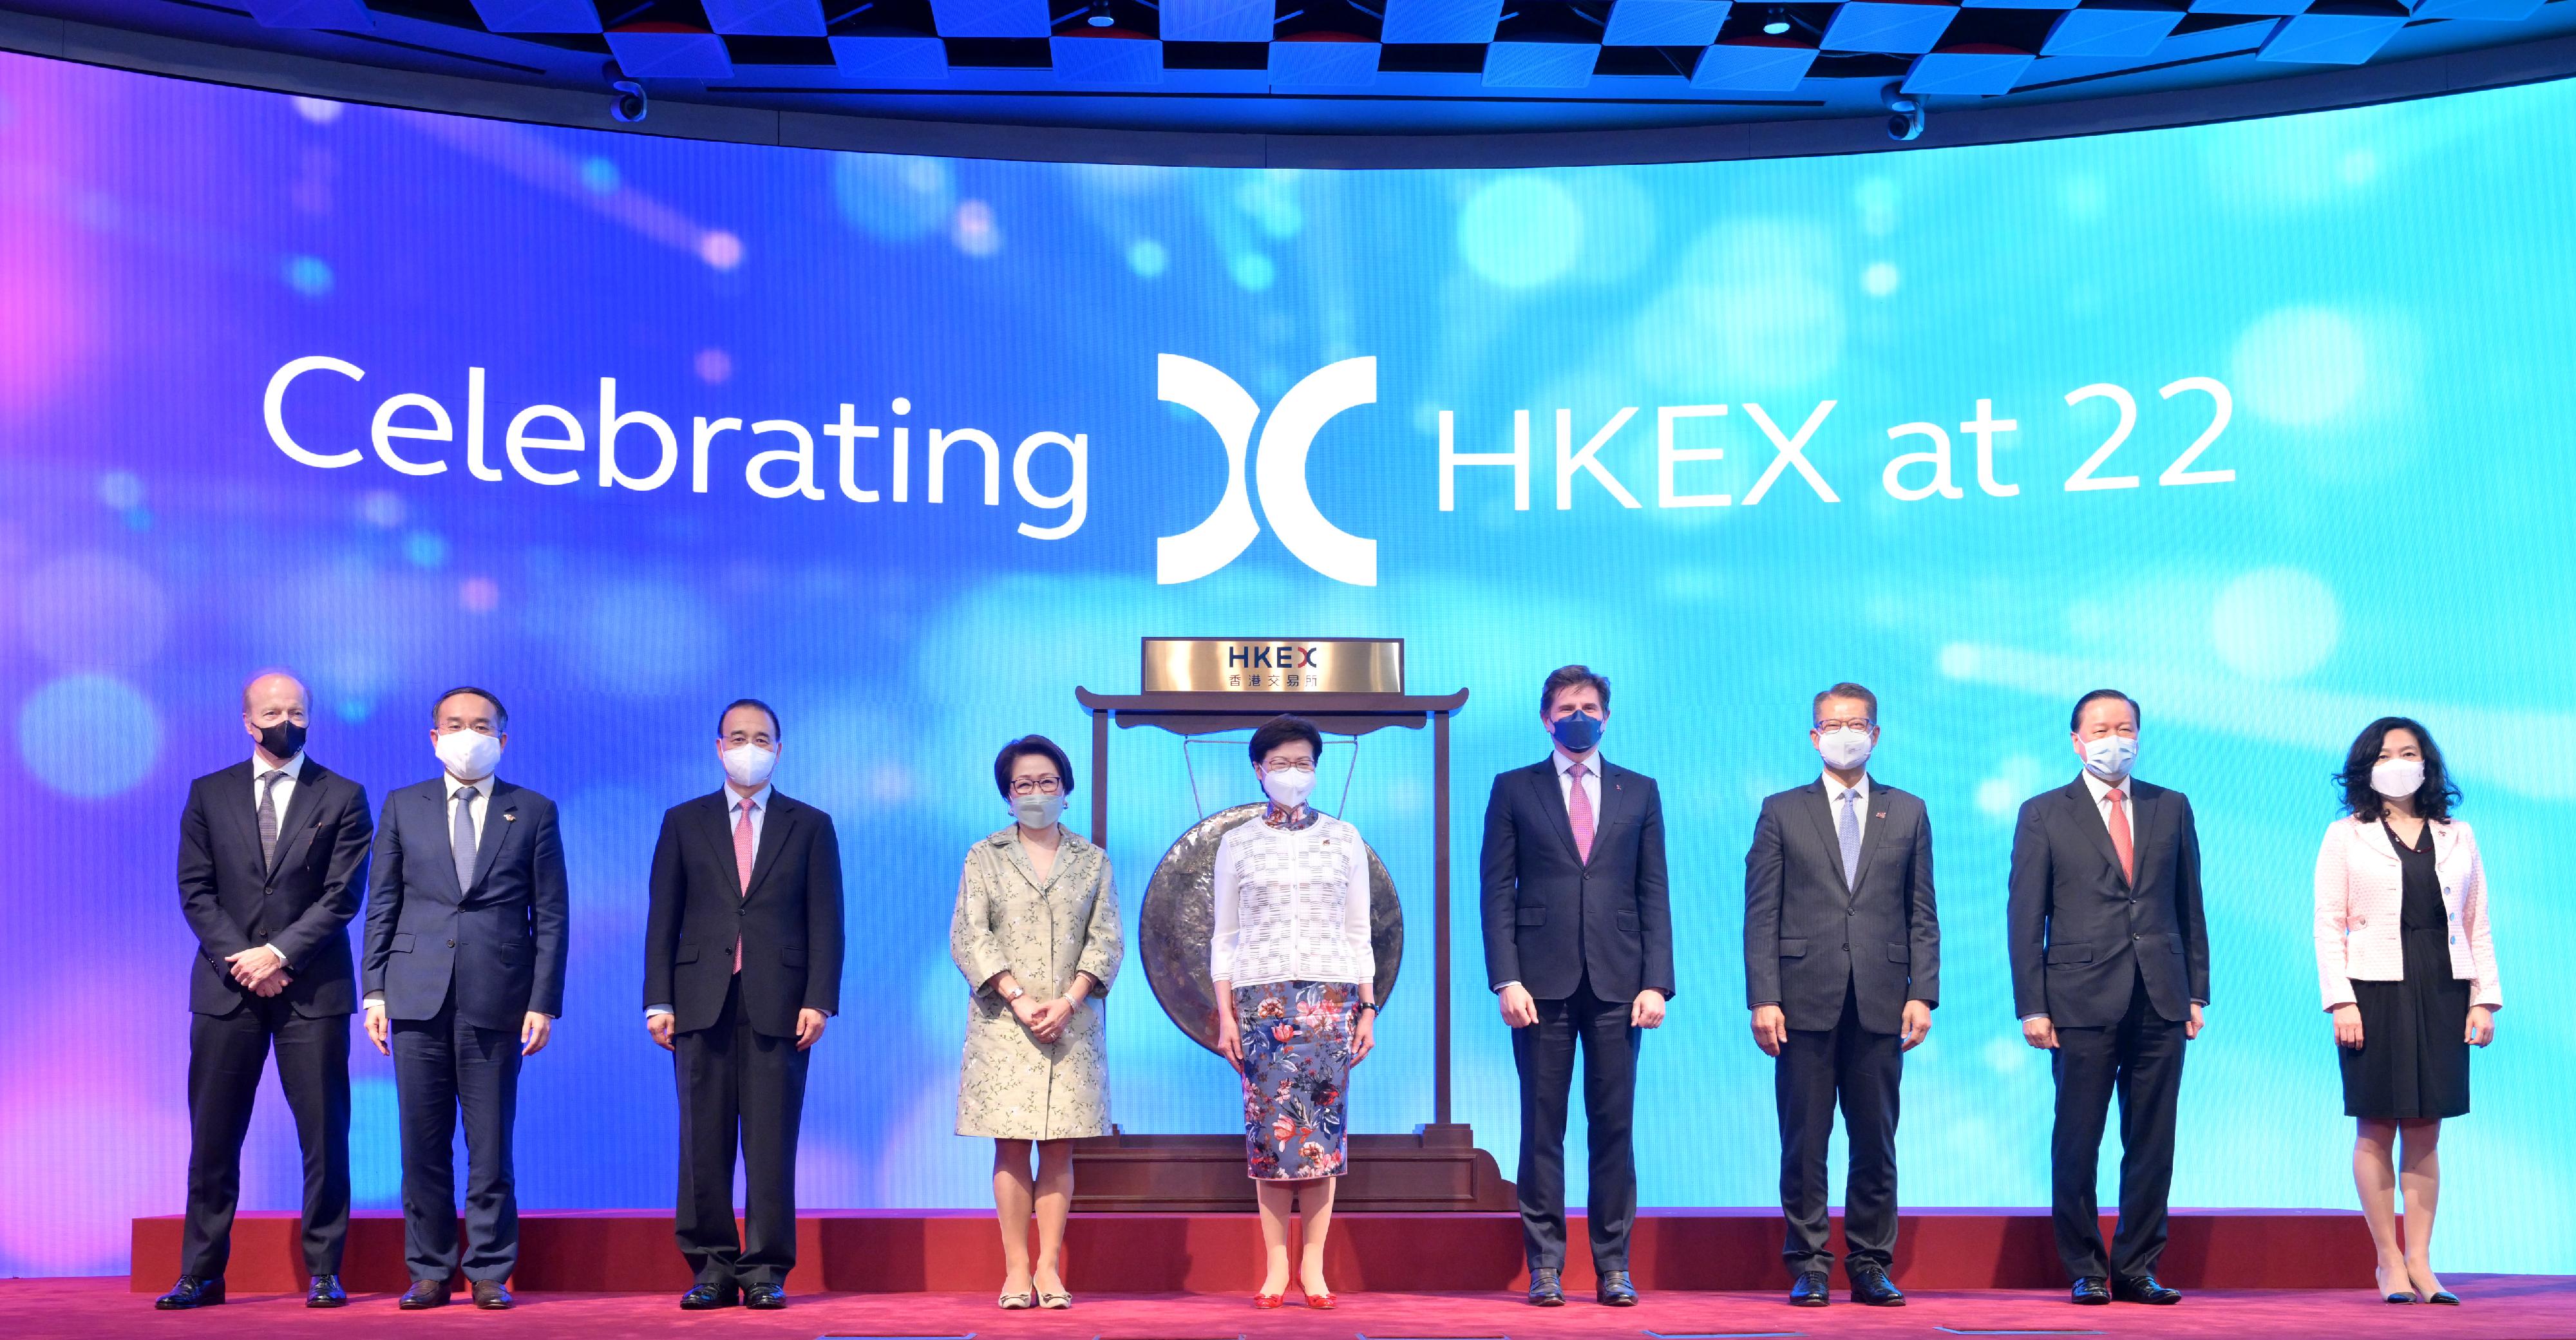 The Chief Executive, Mrs Carrie Lam, attended the Hong Kong Exchanges and Clearing Limited (HKEX) 22nd Anniversary Celebrations today (June 21). Photo shows (from left) the Chief Executive Officer of the Securities and Futures Commission, Mr Ashley Alder; the Secretary for Financial Services and the Treasury, Mr Christopher Hui; the Commissioner of the Ministry of Foreign Affairs of the People's Republic of China in the Hong Kong Special Administrative Region, Mr Liu Guangyuan; the Chairman of the HKEX, Mrs Laura Cha; Mrs Lam; the Chief Executive Officer of the HKEX, Mr Nicolas Aguzin; the Financial Secretary, Mr Paul Chan; the Chairman of the Securities and Futures Commission, Mr Tim Lui; and the Permanent Secretary for Financial Services and the Treasury (Financial Services), Ms Salina Yan, at the ceremony.